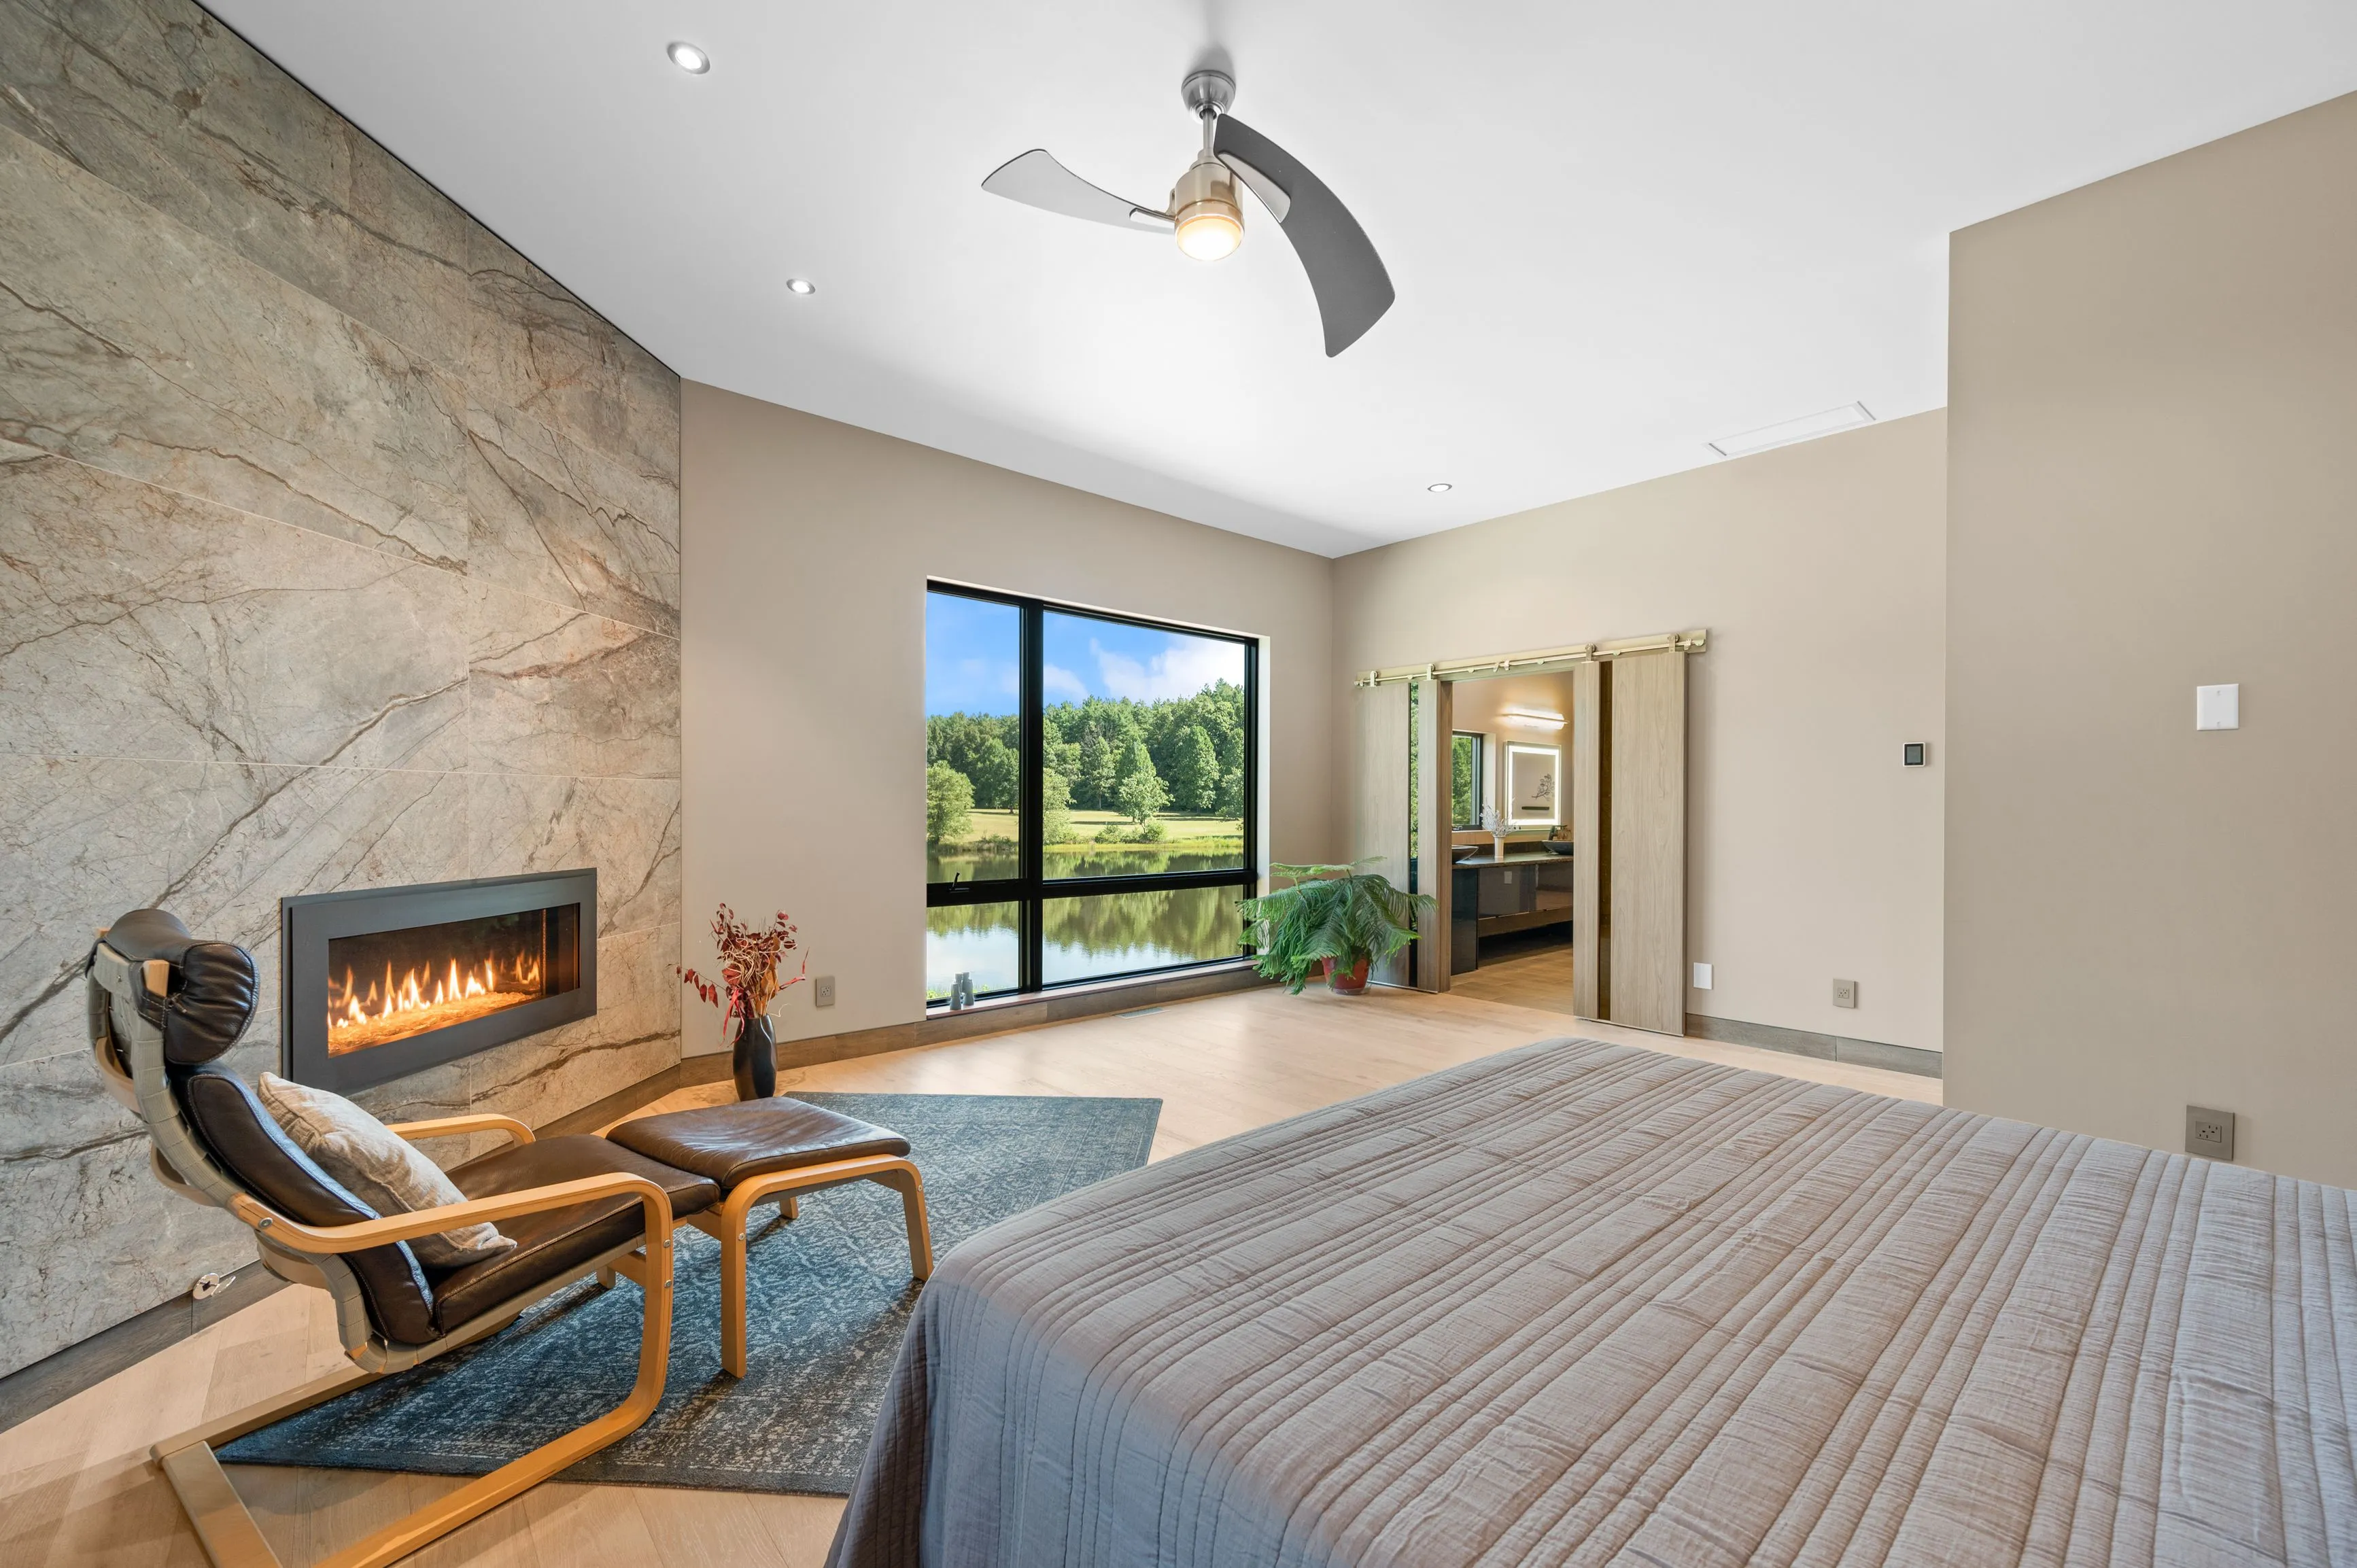 Modern bedroom interior with stone fireplace, hardwood flooring, and large window overlooking a serene lake view.